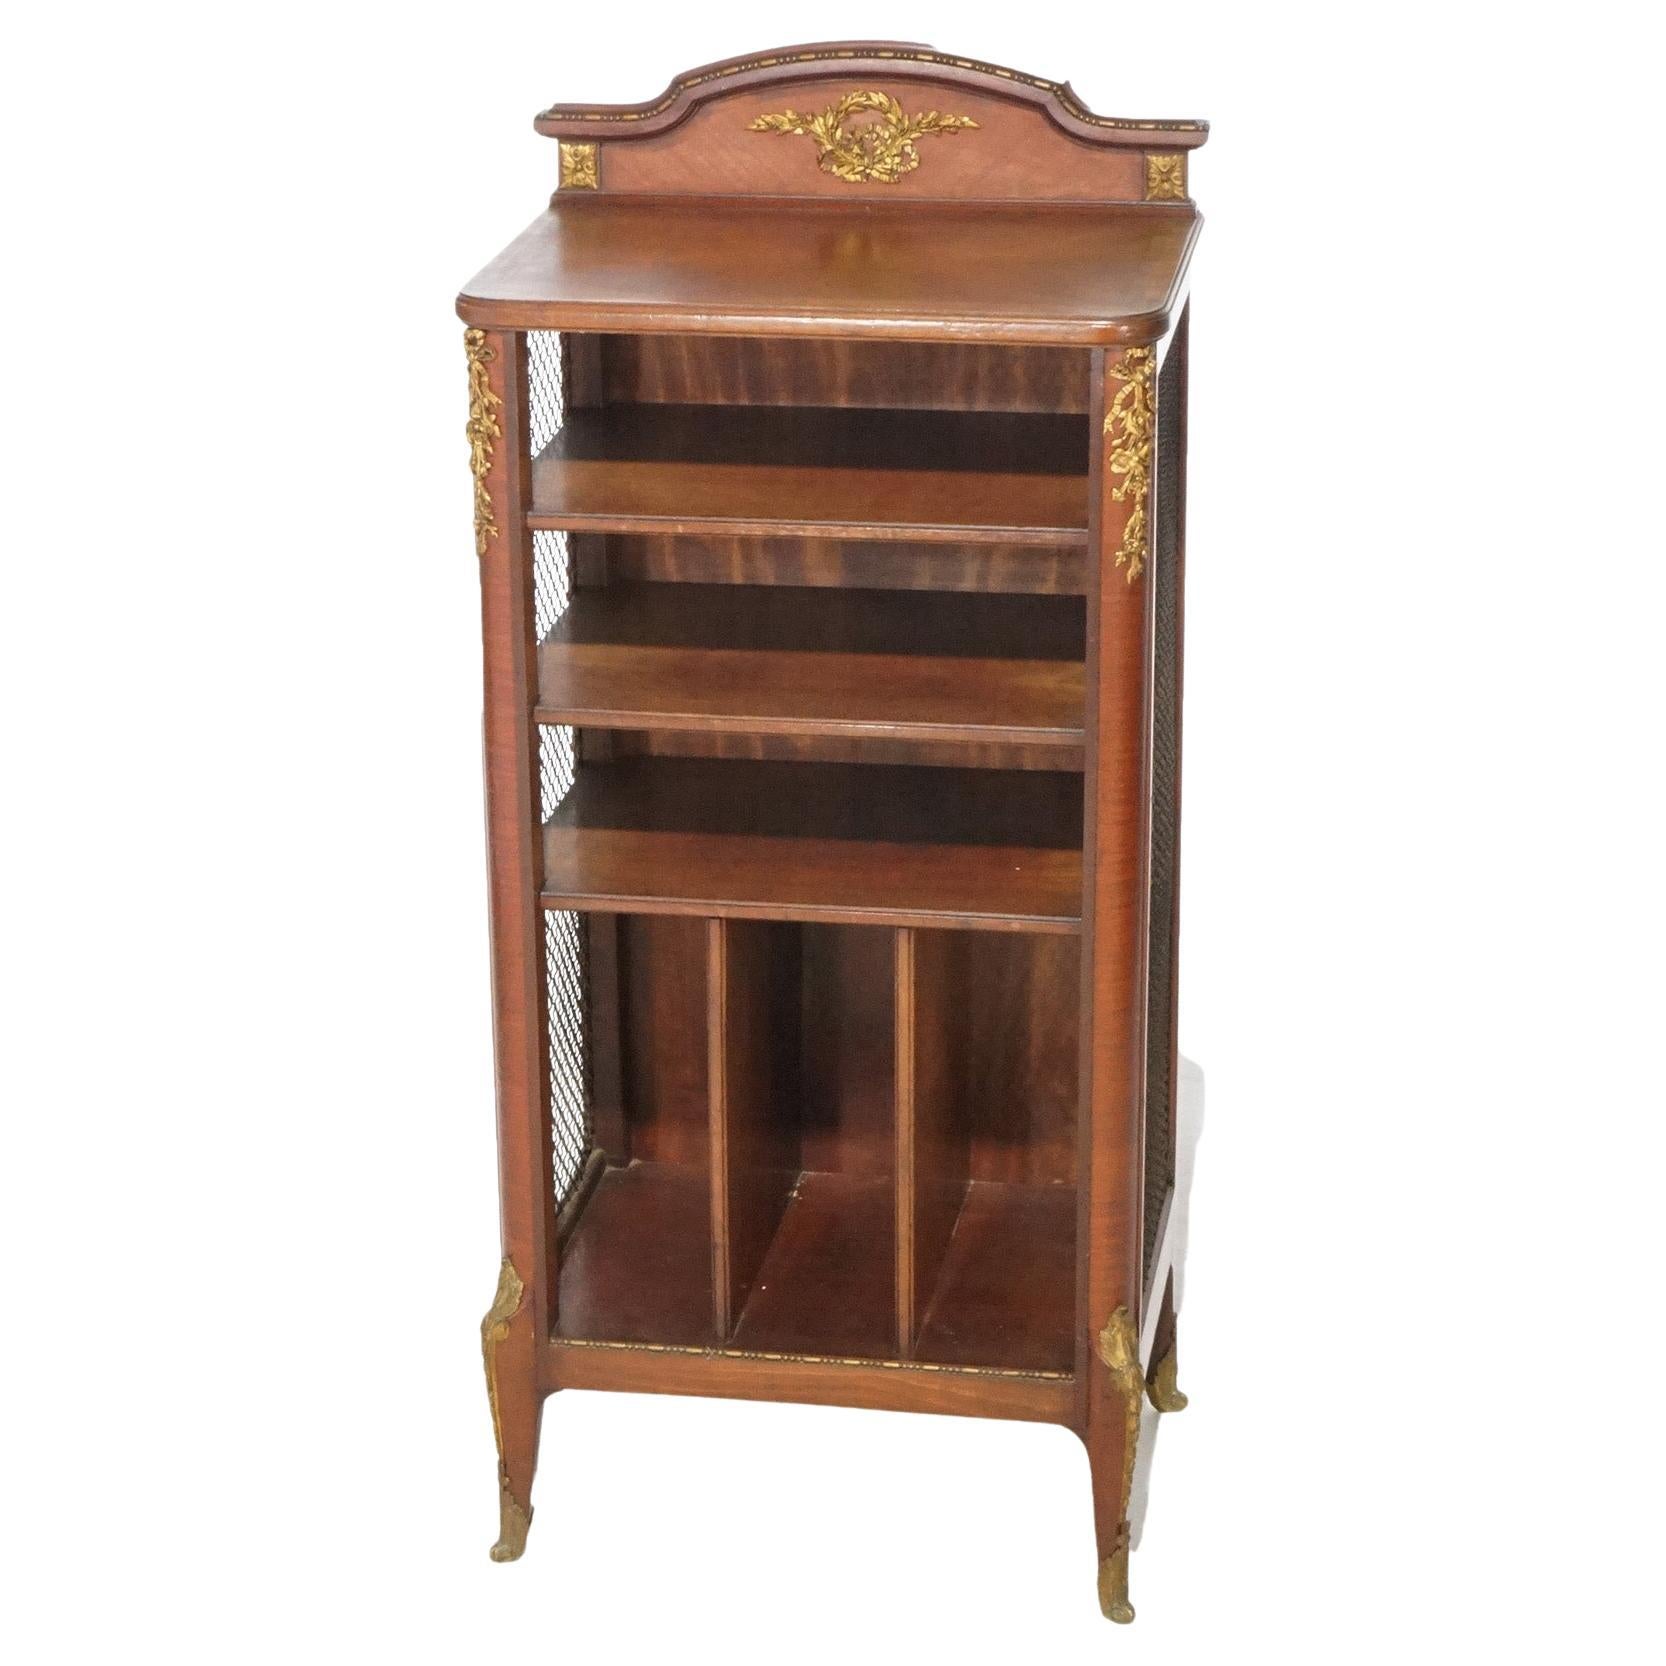 Antique French Kingwood & Satinwood Music Cabinet with Ormolu Mounts circa 1920 For Sale